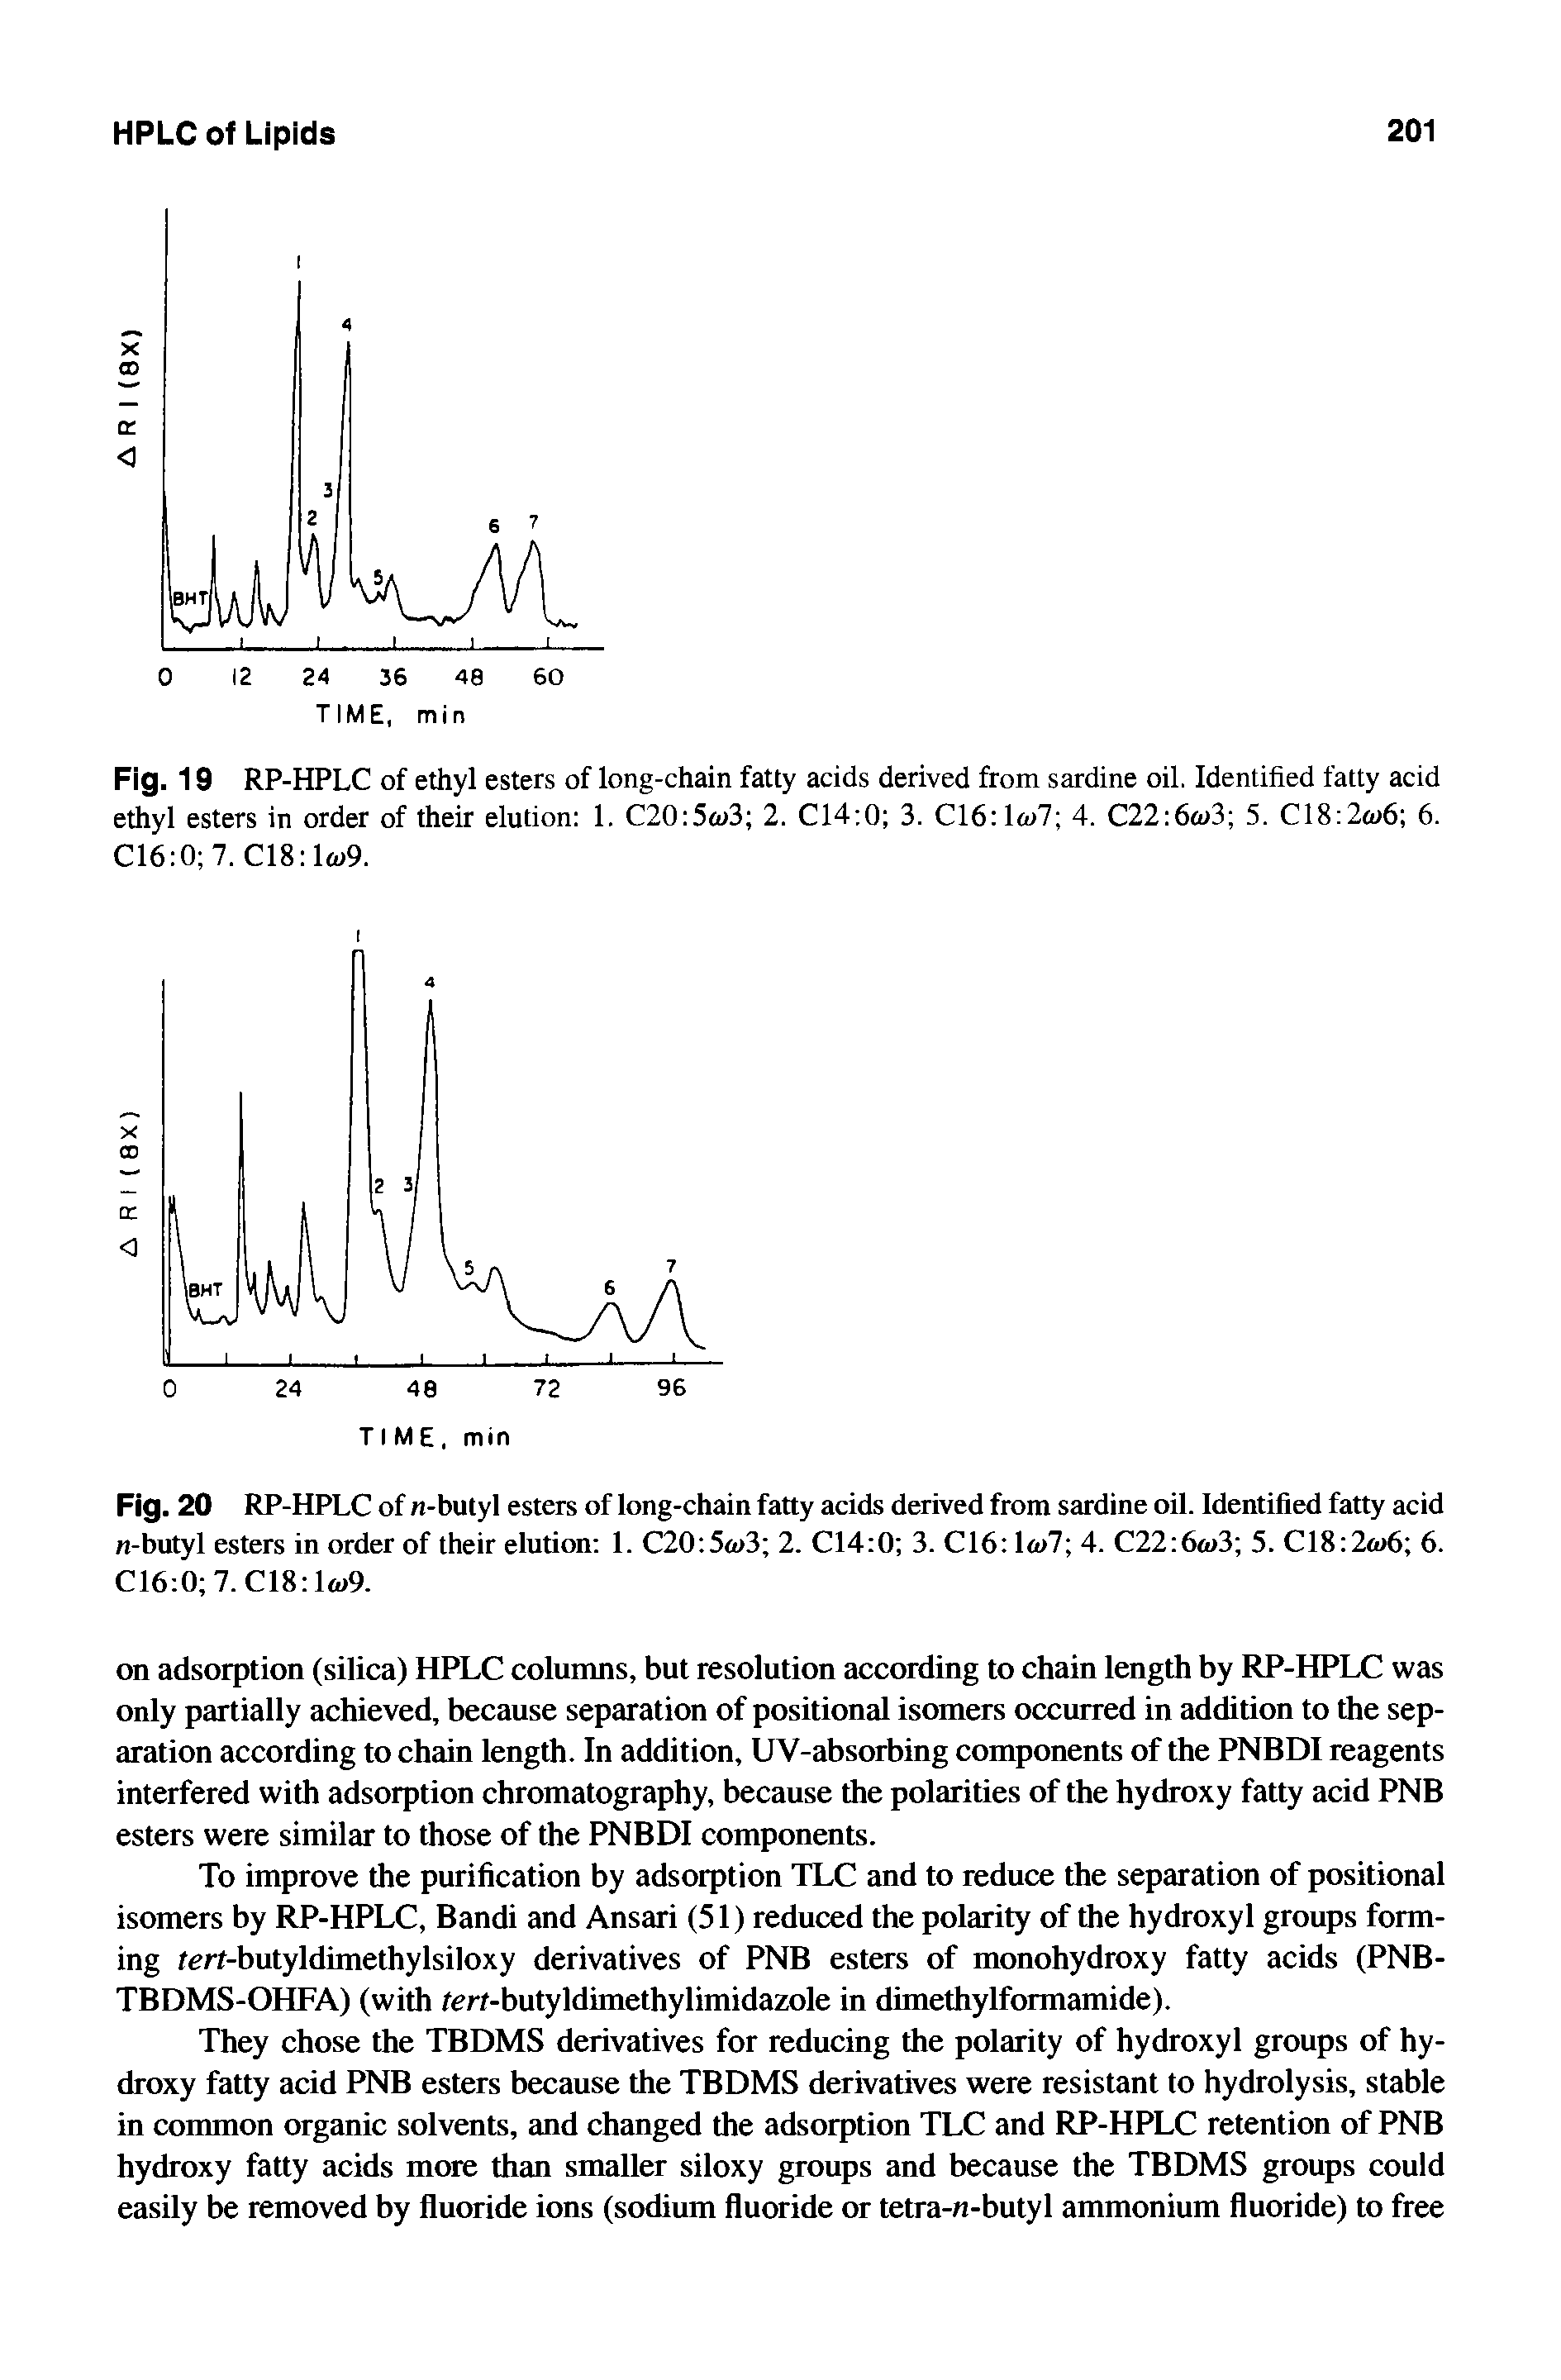 Fig. 20 RP-HPLC of n-butyl esters of long-chain fatty acids derived from sardine oil. Identified fatty acid n-butyl esters in order of their elution 1. C20 5a>3 2. 04 0 3. 06 la>7 4. C22 6 >3 5. 08 2 >6 6. 06 0 7. 08 I<u9.